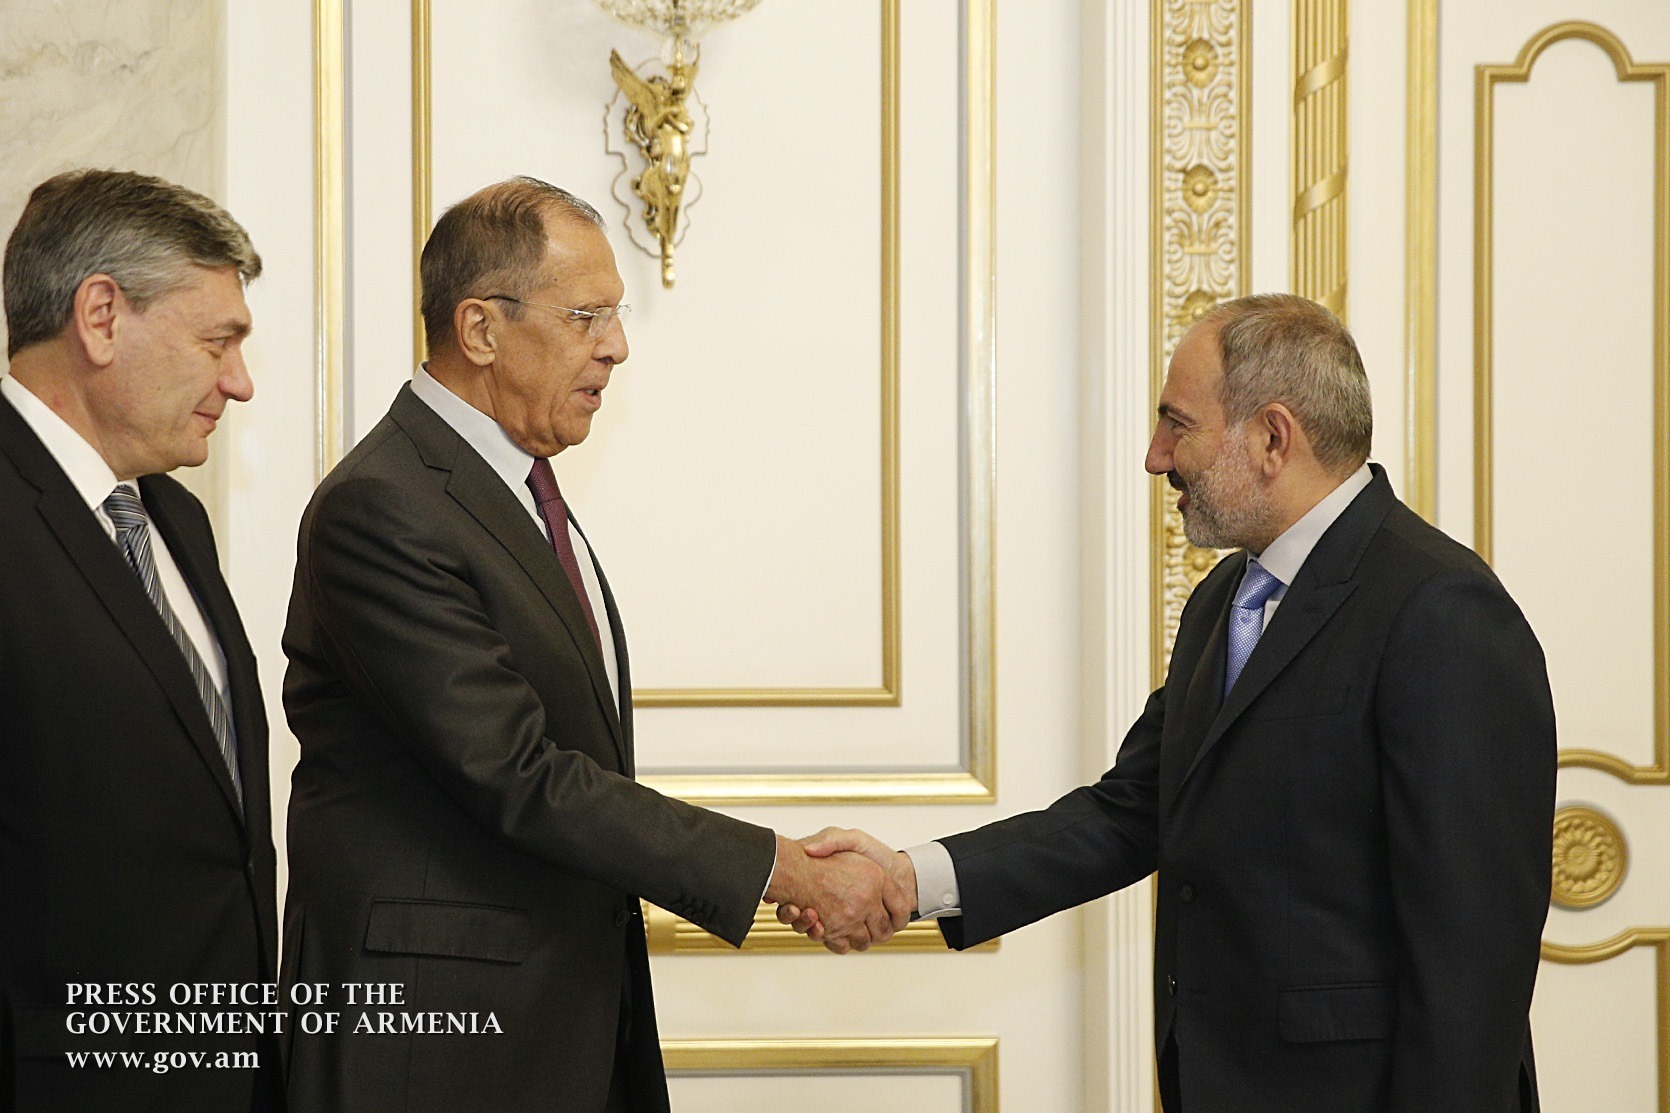 Lavrov responds to Pashinyan’s criticism of Russian peacekeepers